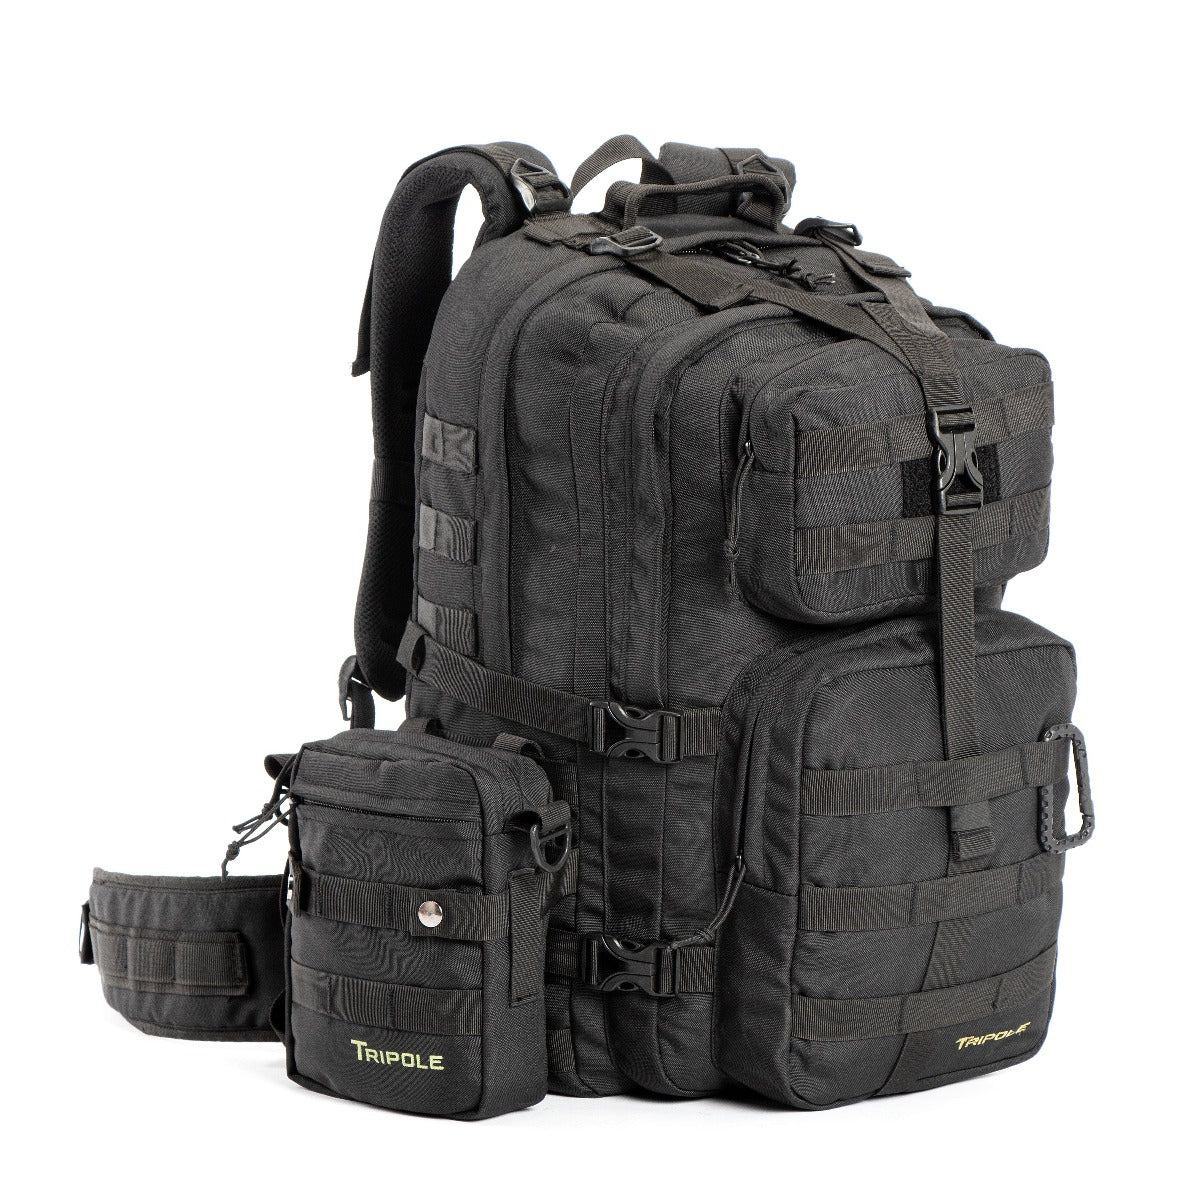 Tripole Alfa Military Tactical Backpack with Sling Bag Attachment -  46 Litres - Black 4